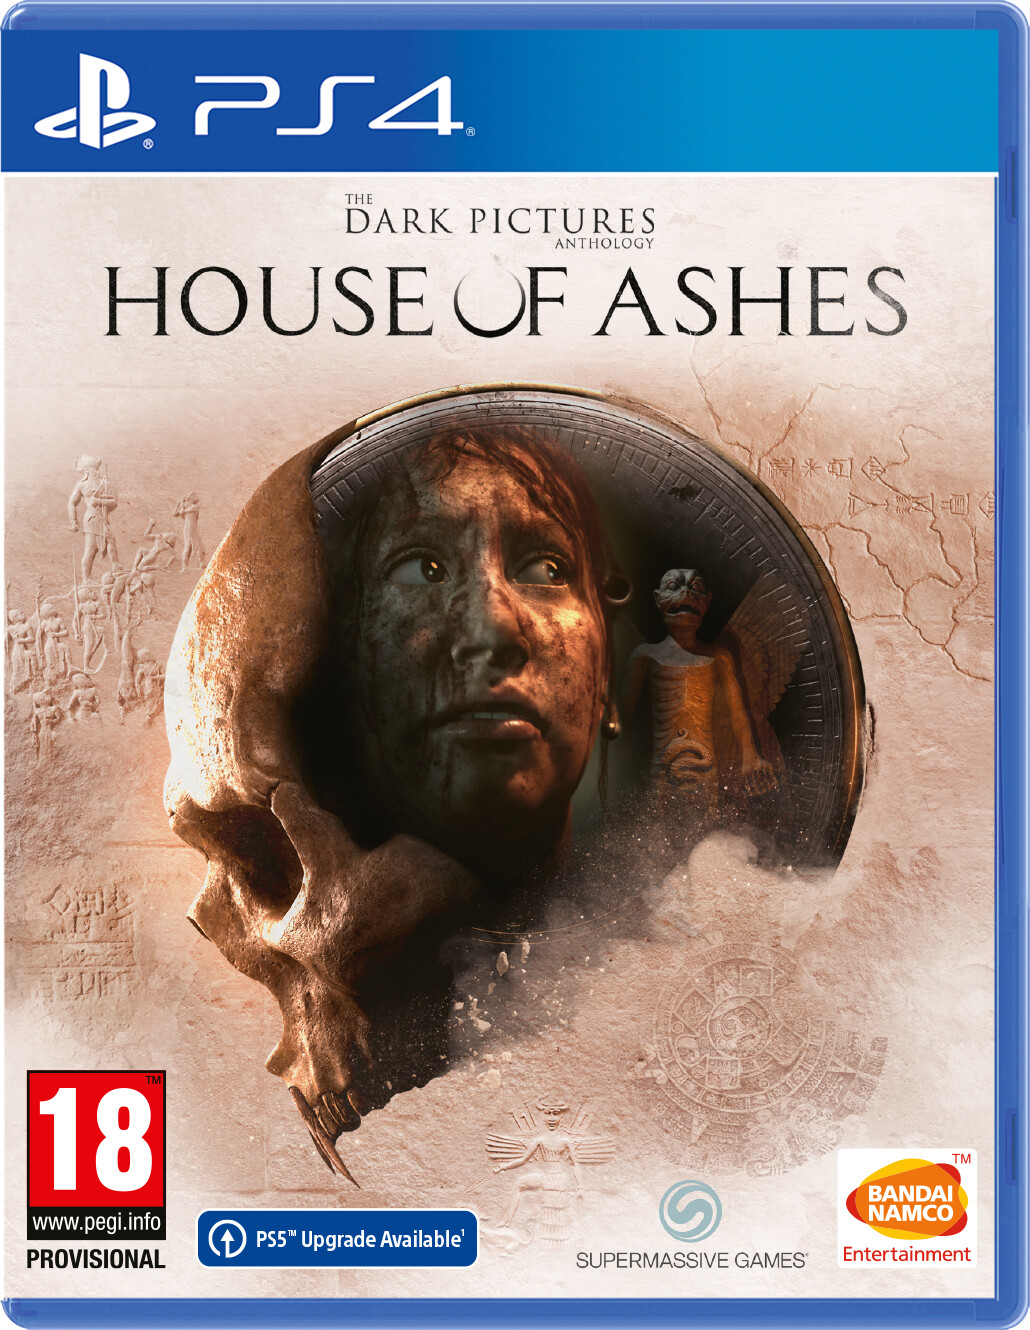 The Dark Pictures Anthology: House Of Ashes - PS4